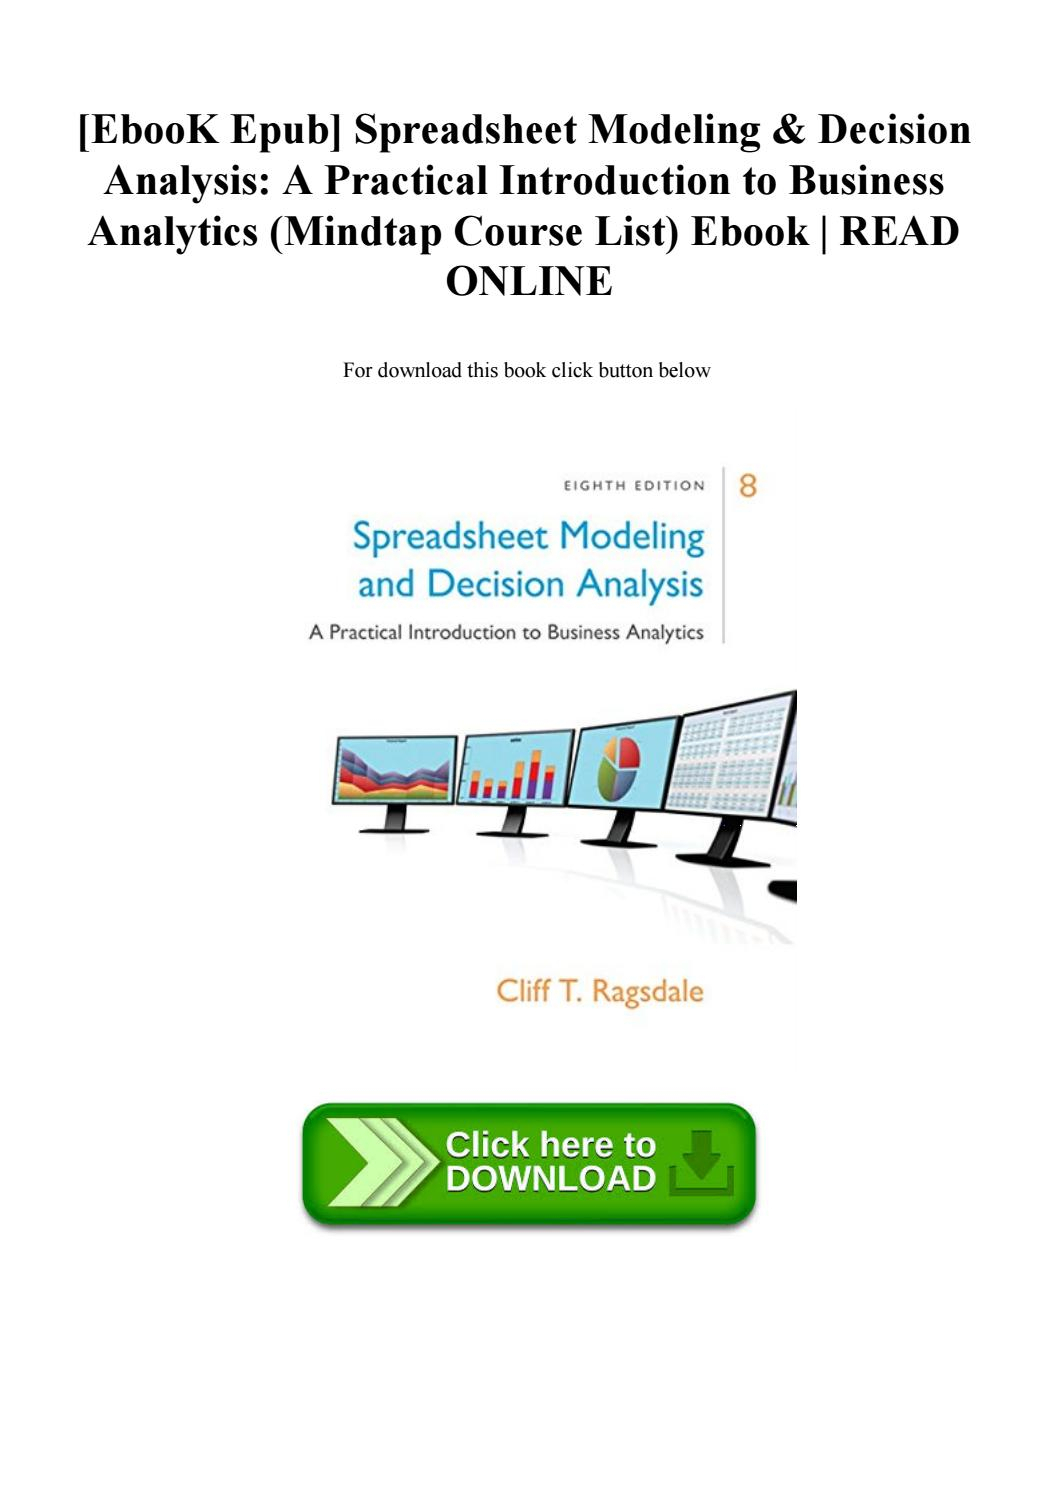 Spreadsheet Modeling And Decision Analysis Ebook Throughout Ebook Epub] Spreadsheet Modeling  Decision Analysis A Practical